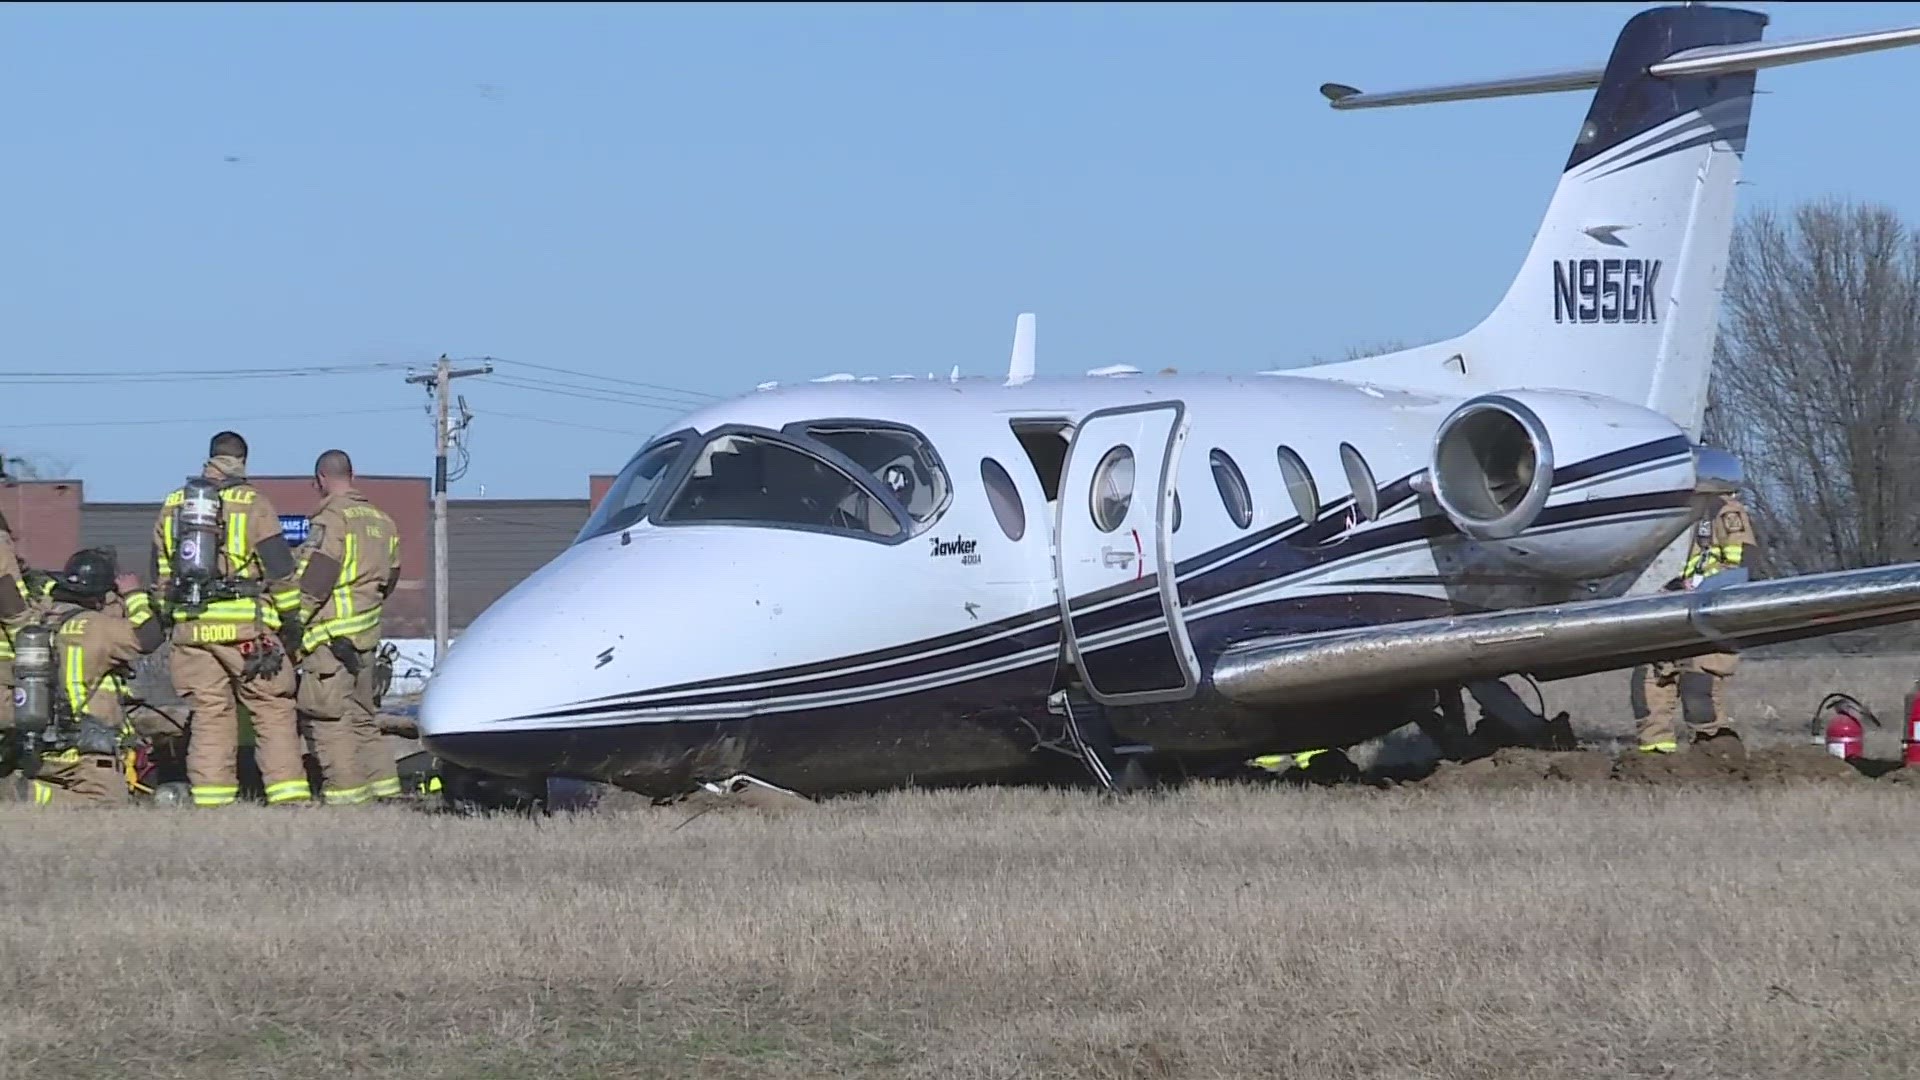 TWO PEOPLE ARE INJURED AFTER A PLANE WENT OFF THE RUNWAY AT THADEN FIELD THIS AFTERNOON AFTER WHAT APPEARS TO BE A MECHANICAL ISSUE.